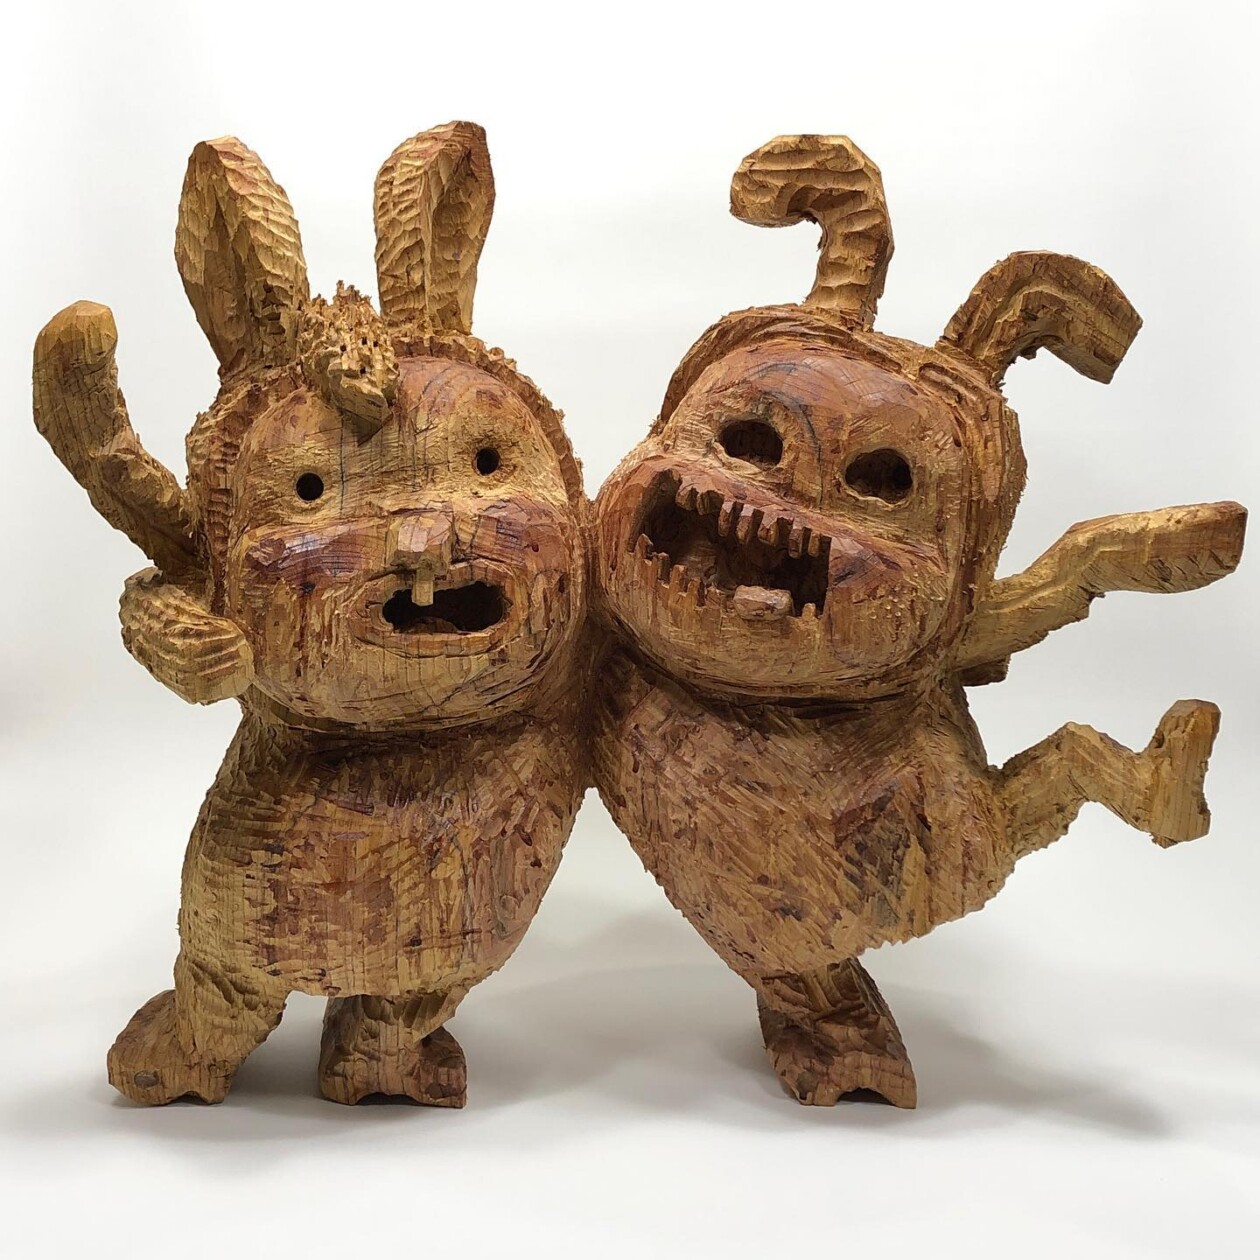 The Enchanting World Of Hirosuke Yabe's Wooden Beings (17)